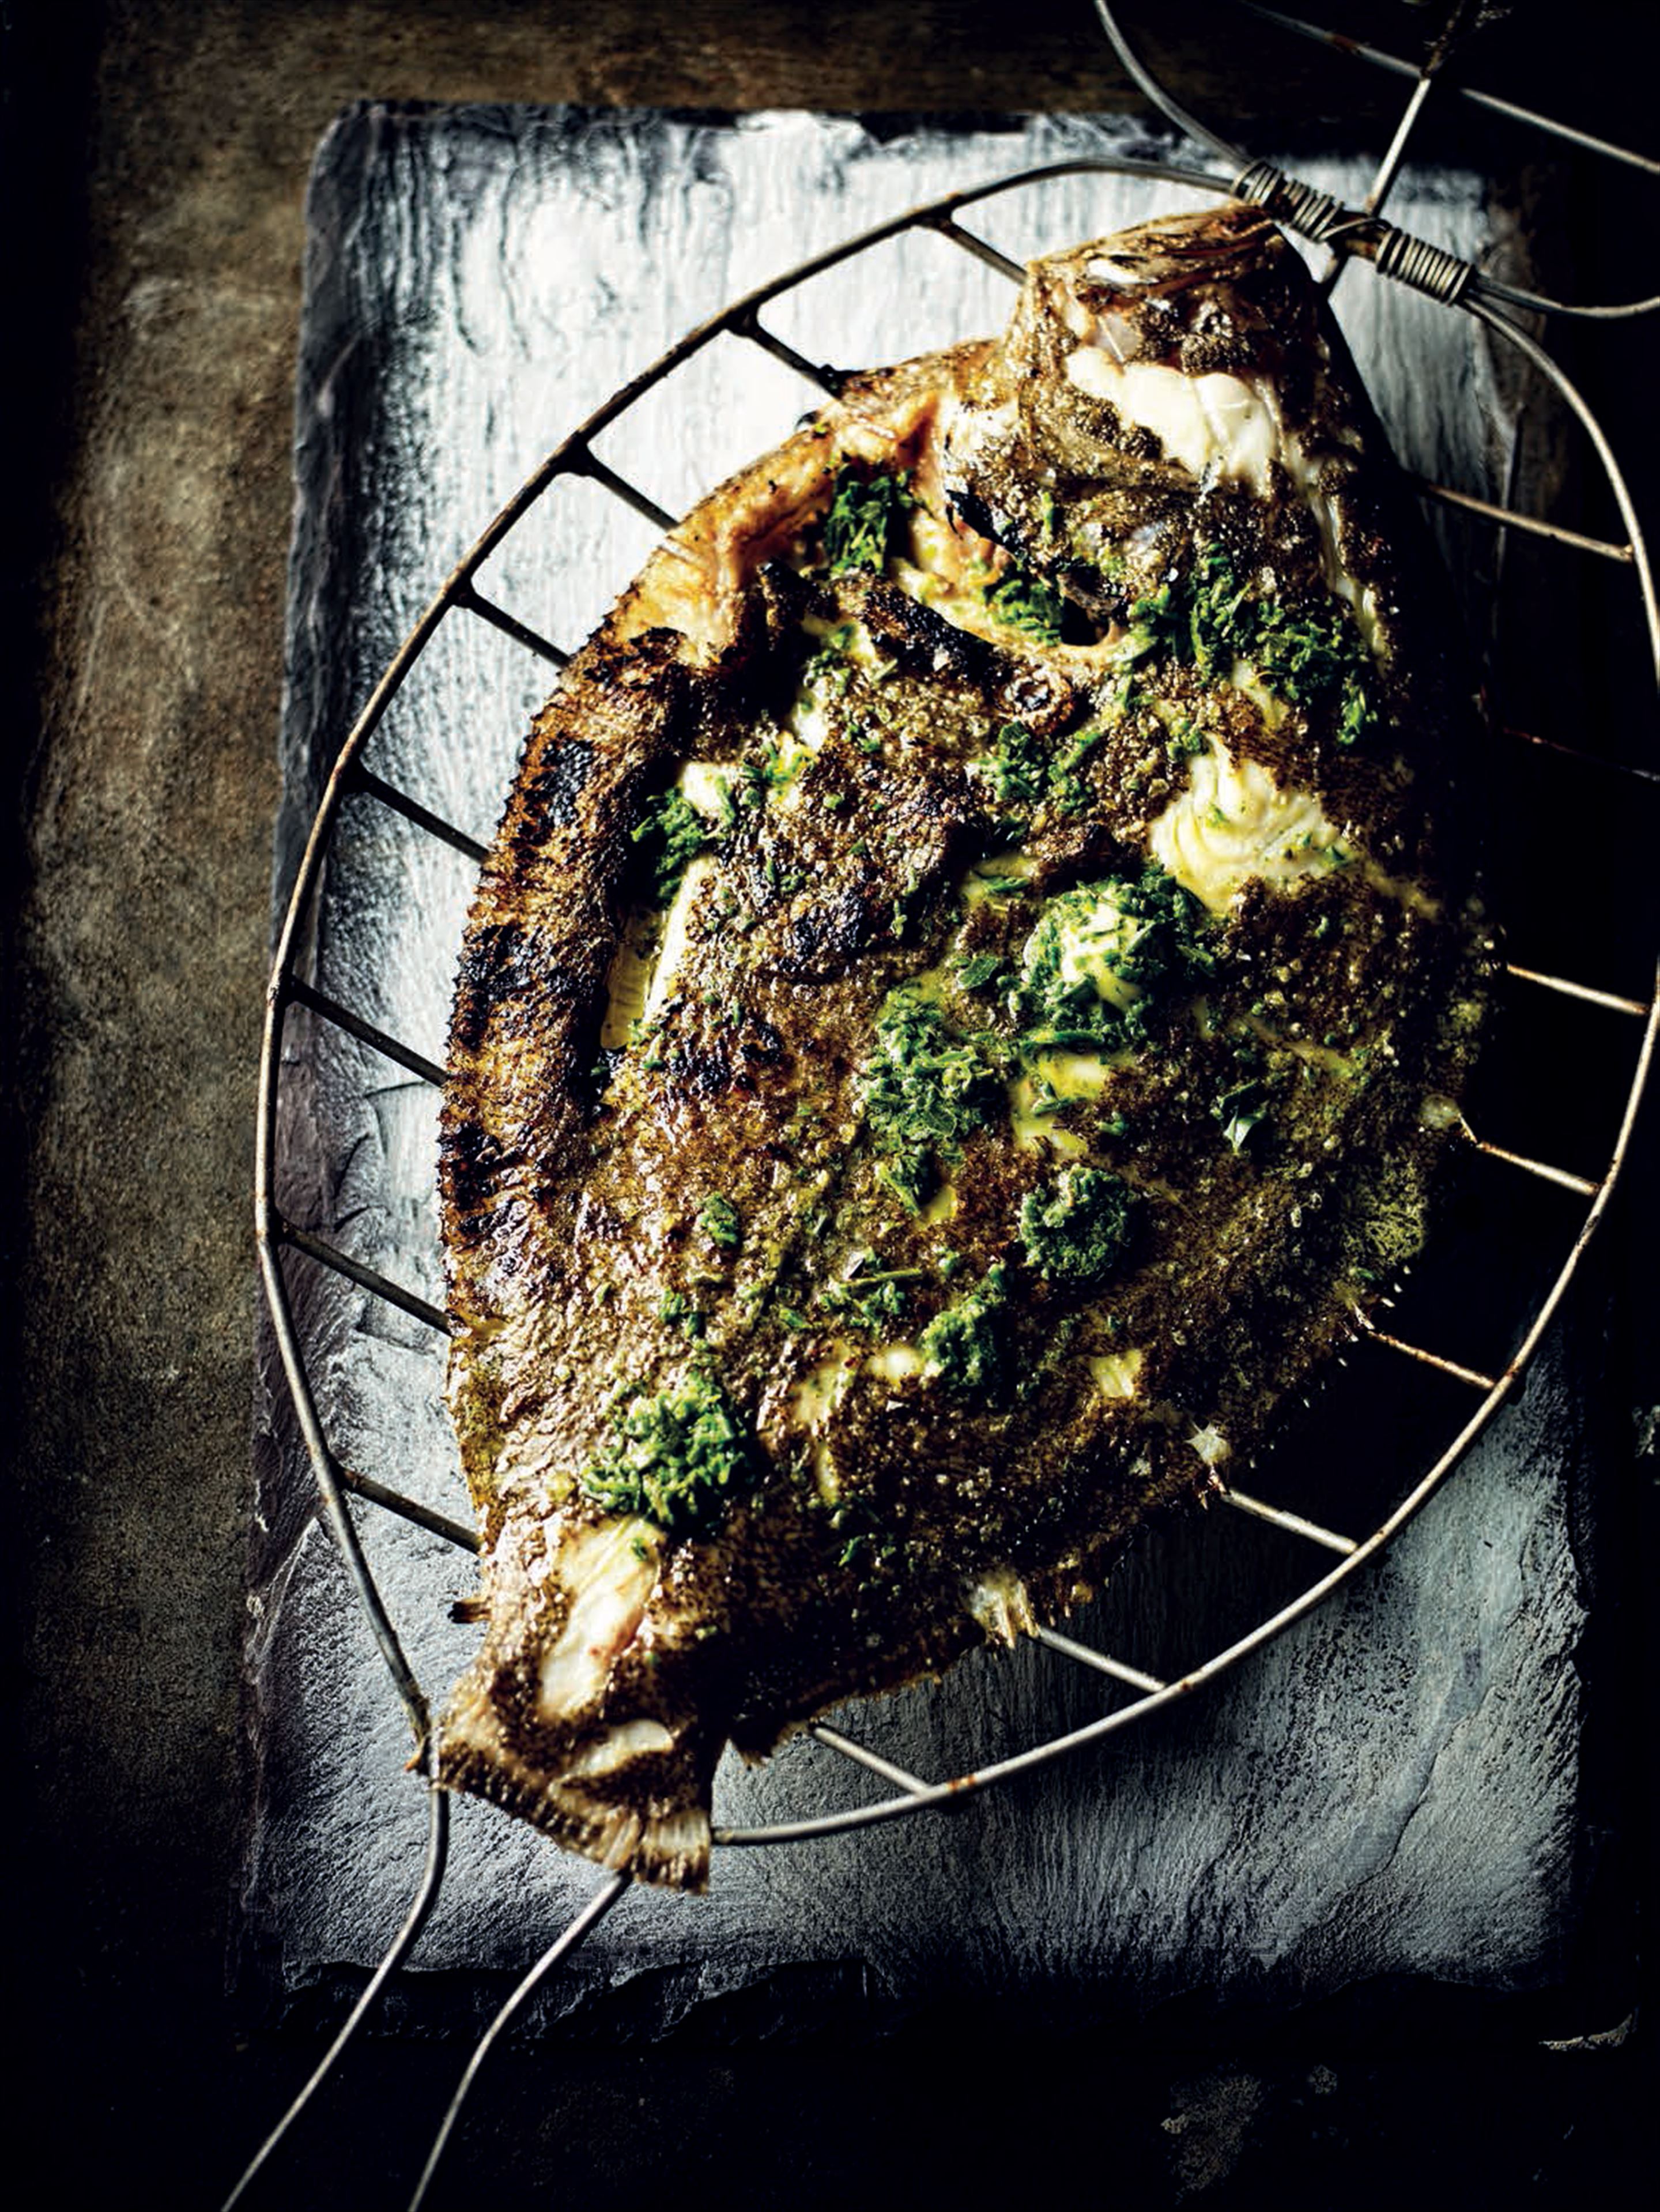 Barbecued brill with seaweed butter